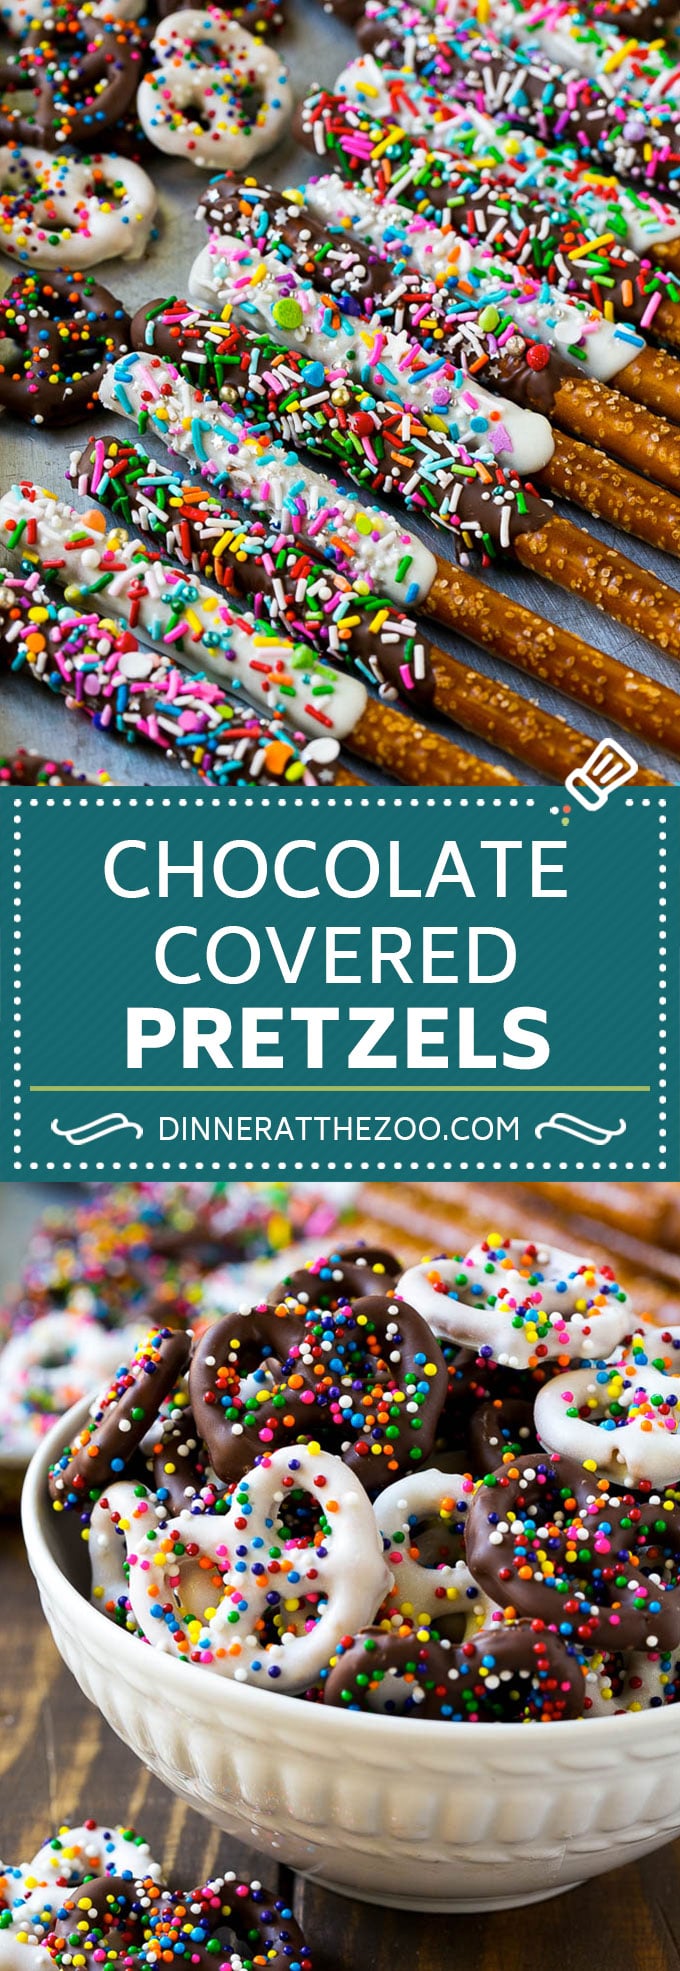 Chocolate Covered Pretzels Recipe | Sprinkle Pretzels | No Bake Dessert #pretzels #chocolate #sprinkles #candy #dinneratthezoo